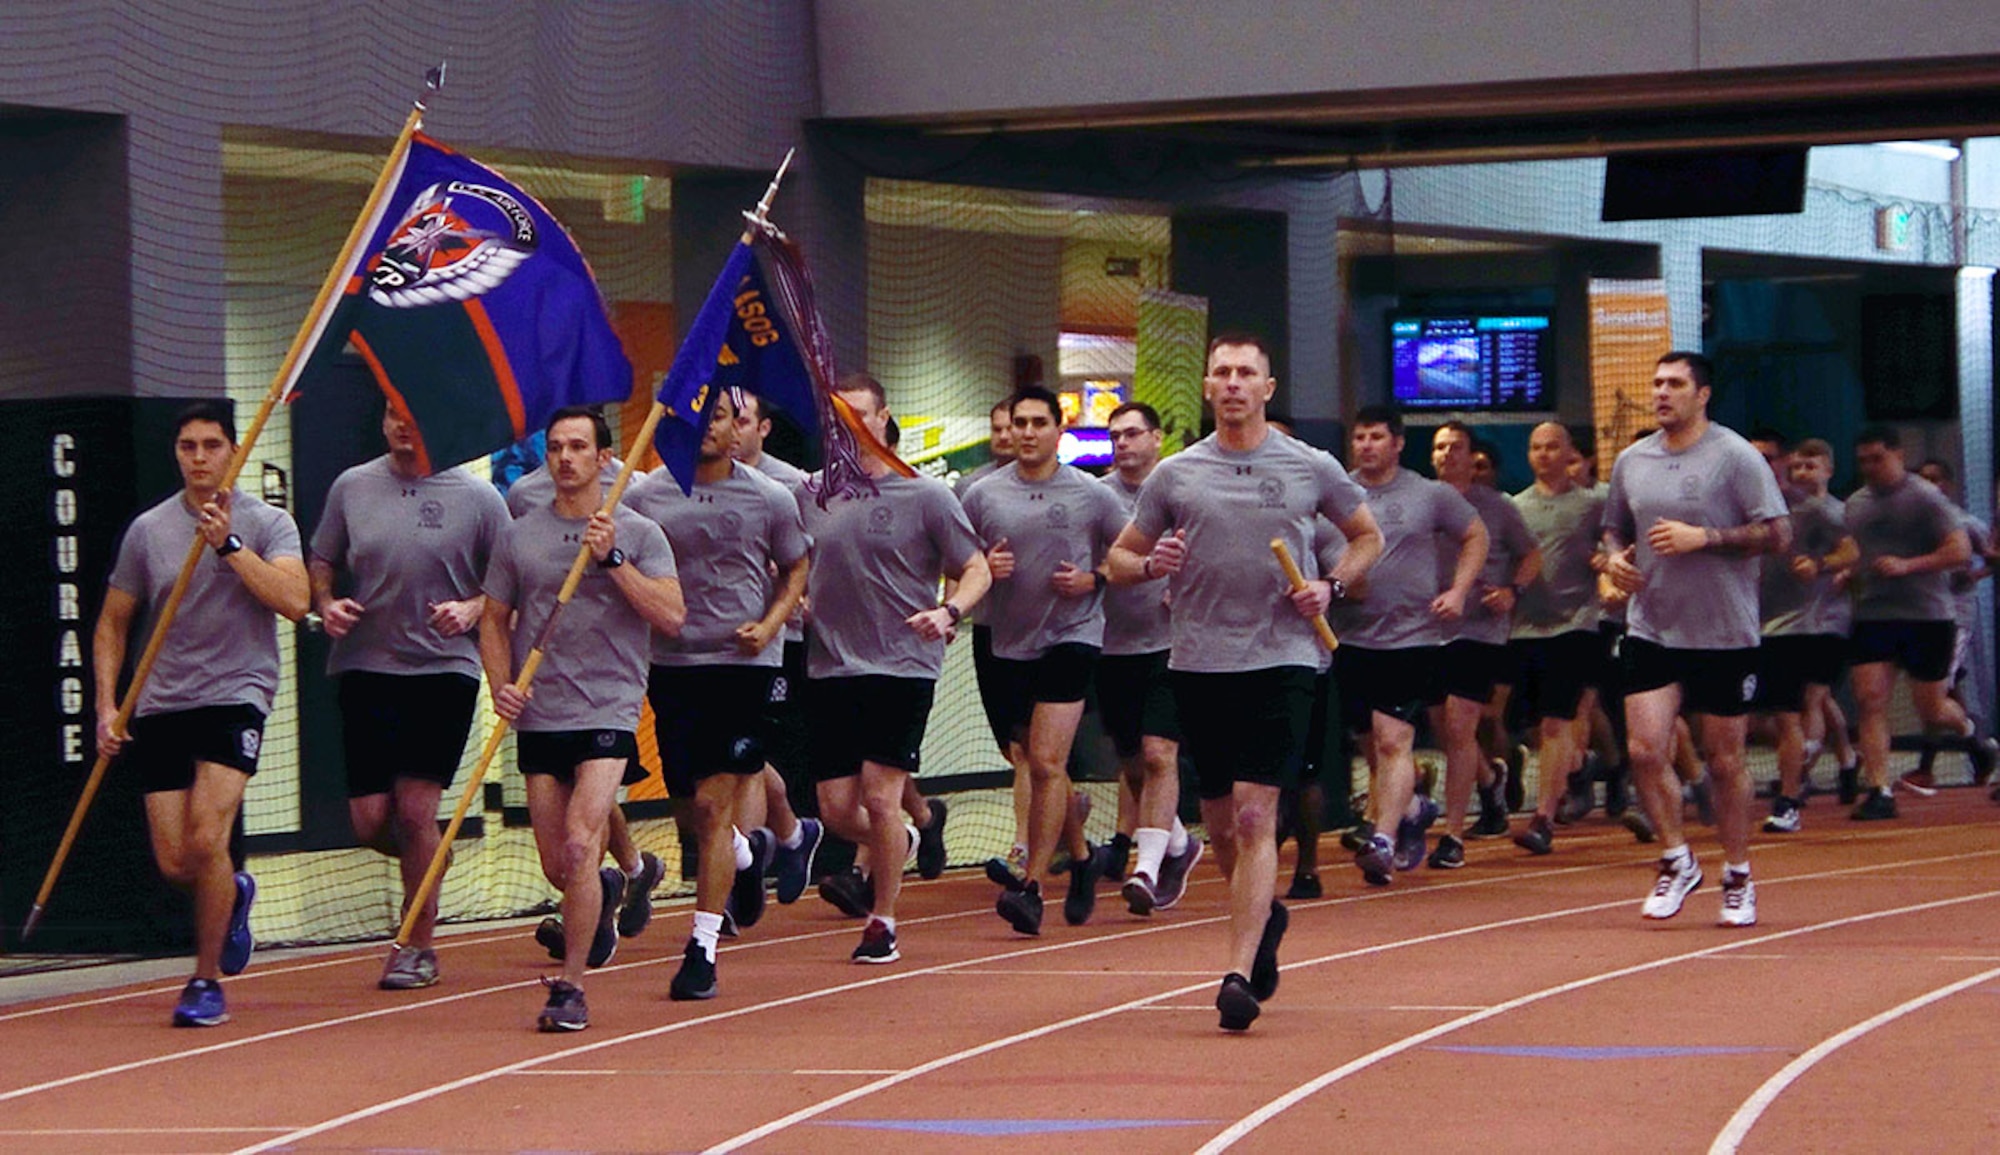 Members of the 3rd Air Operations Support Squadron complete a lap inside the Alaska Dome in Anchorage March 27 during their annual 24-hour run challenge. The challenge is a worldwide competition to see how many miles the TACPs can run and also to ensure those who made the ultimate sacrifice are never forgotten. (U.S. Air Force photo/Staff Sgt. Sheila deVera)